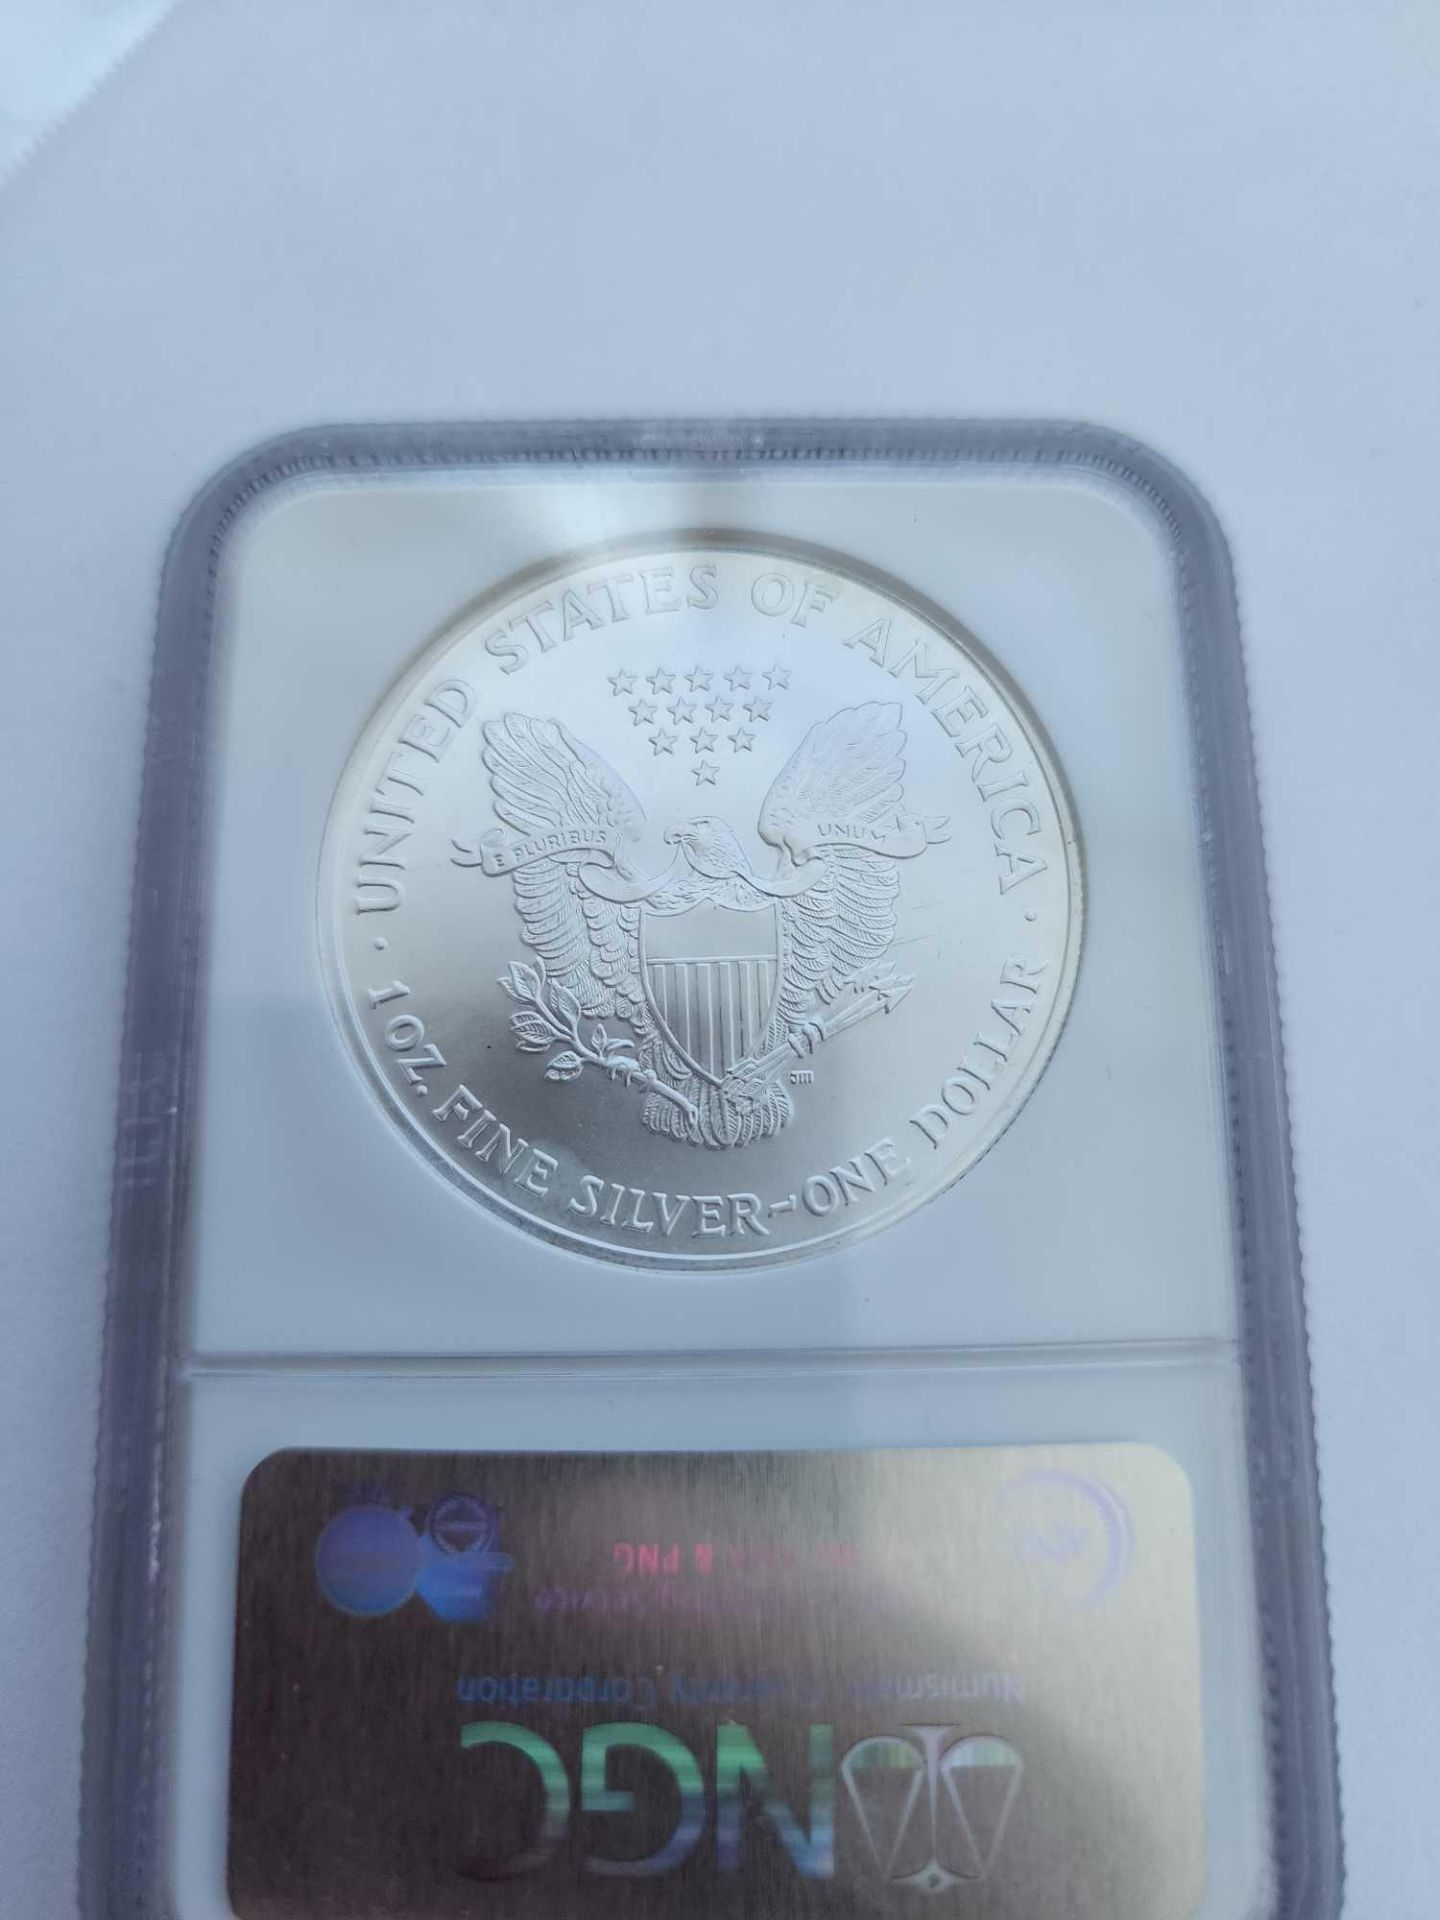 2006 Graded Silver Dollar - Image 2 of 2